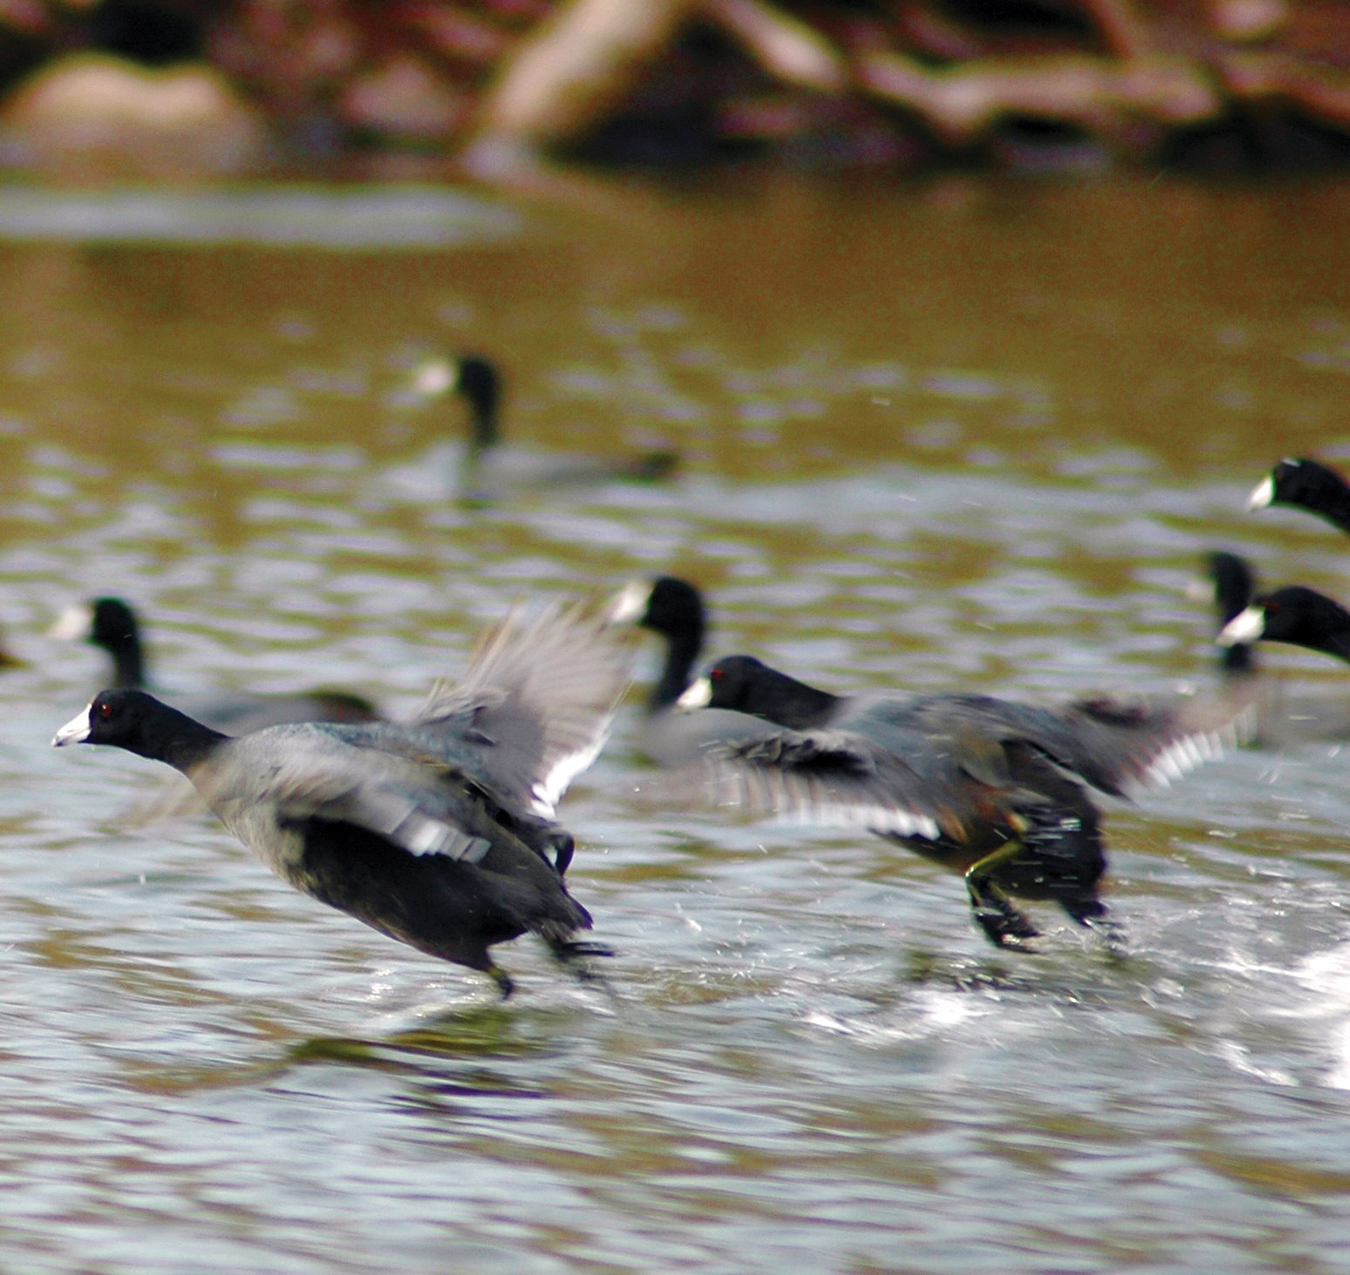 Coots need to run along the surface of the water to become airborne, making them easy targets. PhotoS by John N. Felsher